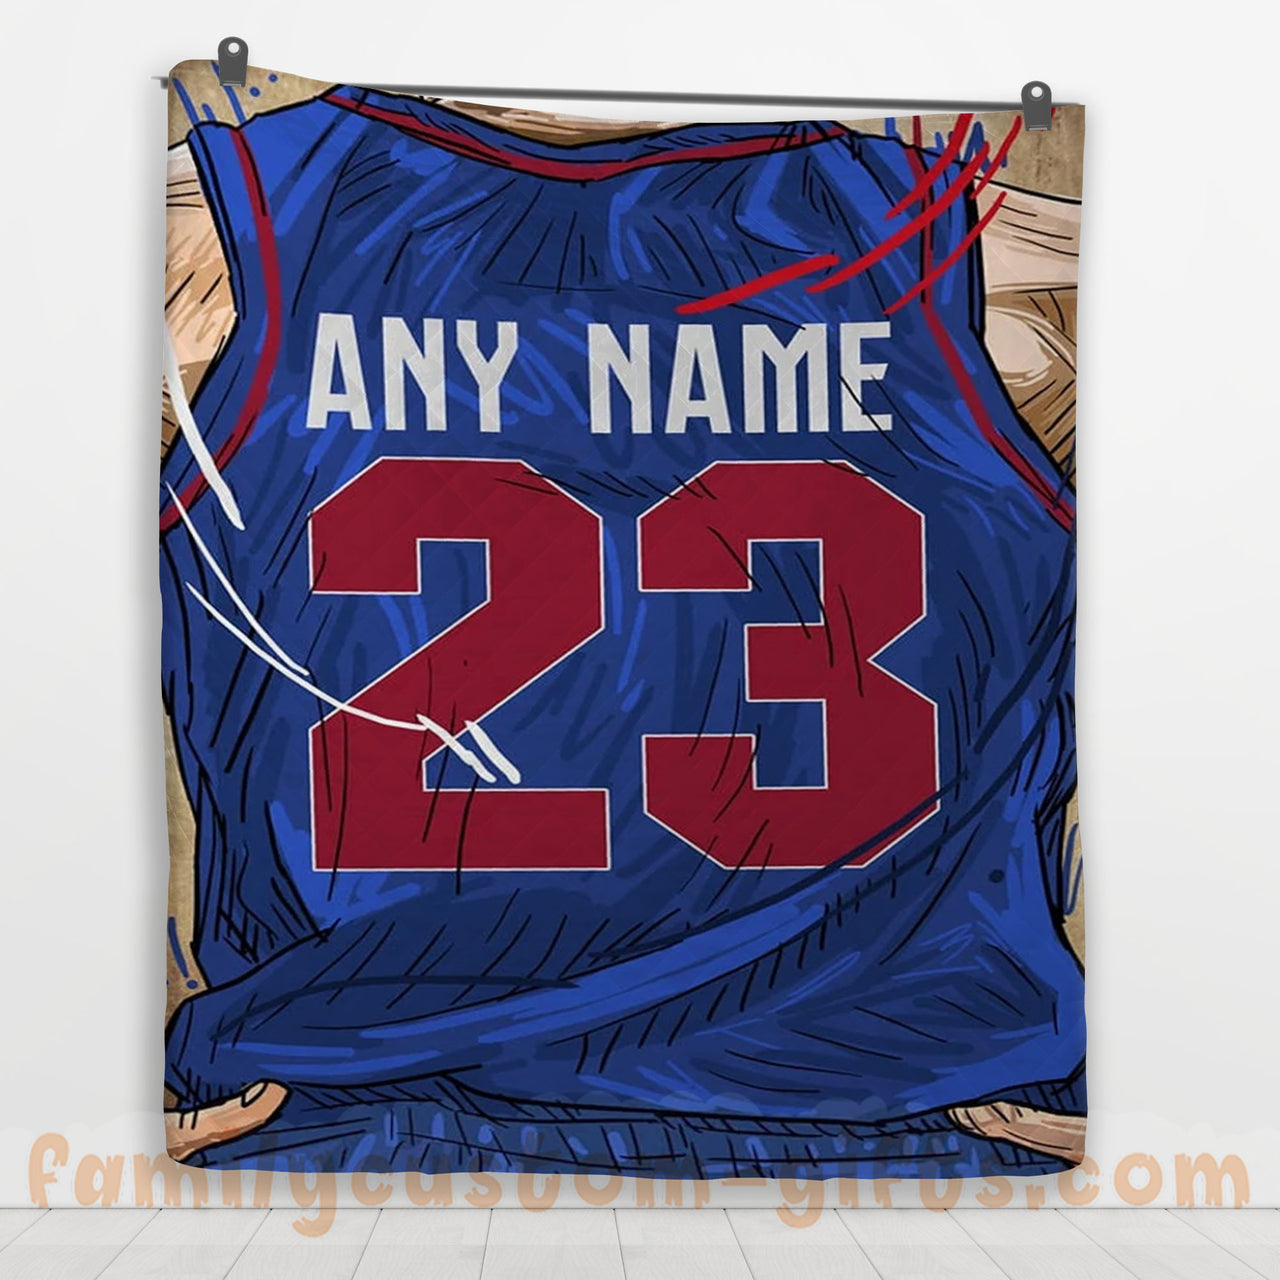 Custom Premium Quilt Blanket Detroit Jersey Basketball Personalized Quilt Gifts for Her & Him